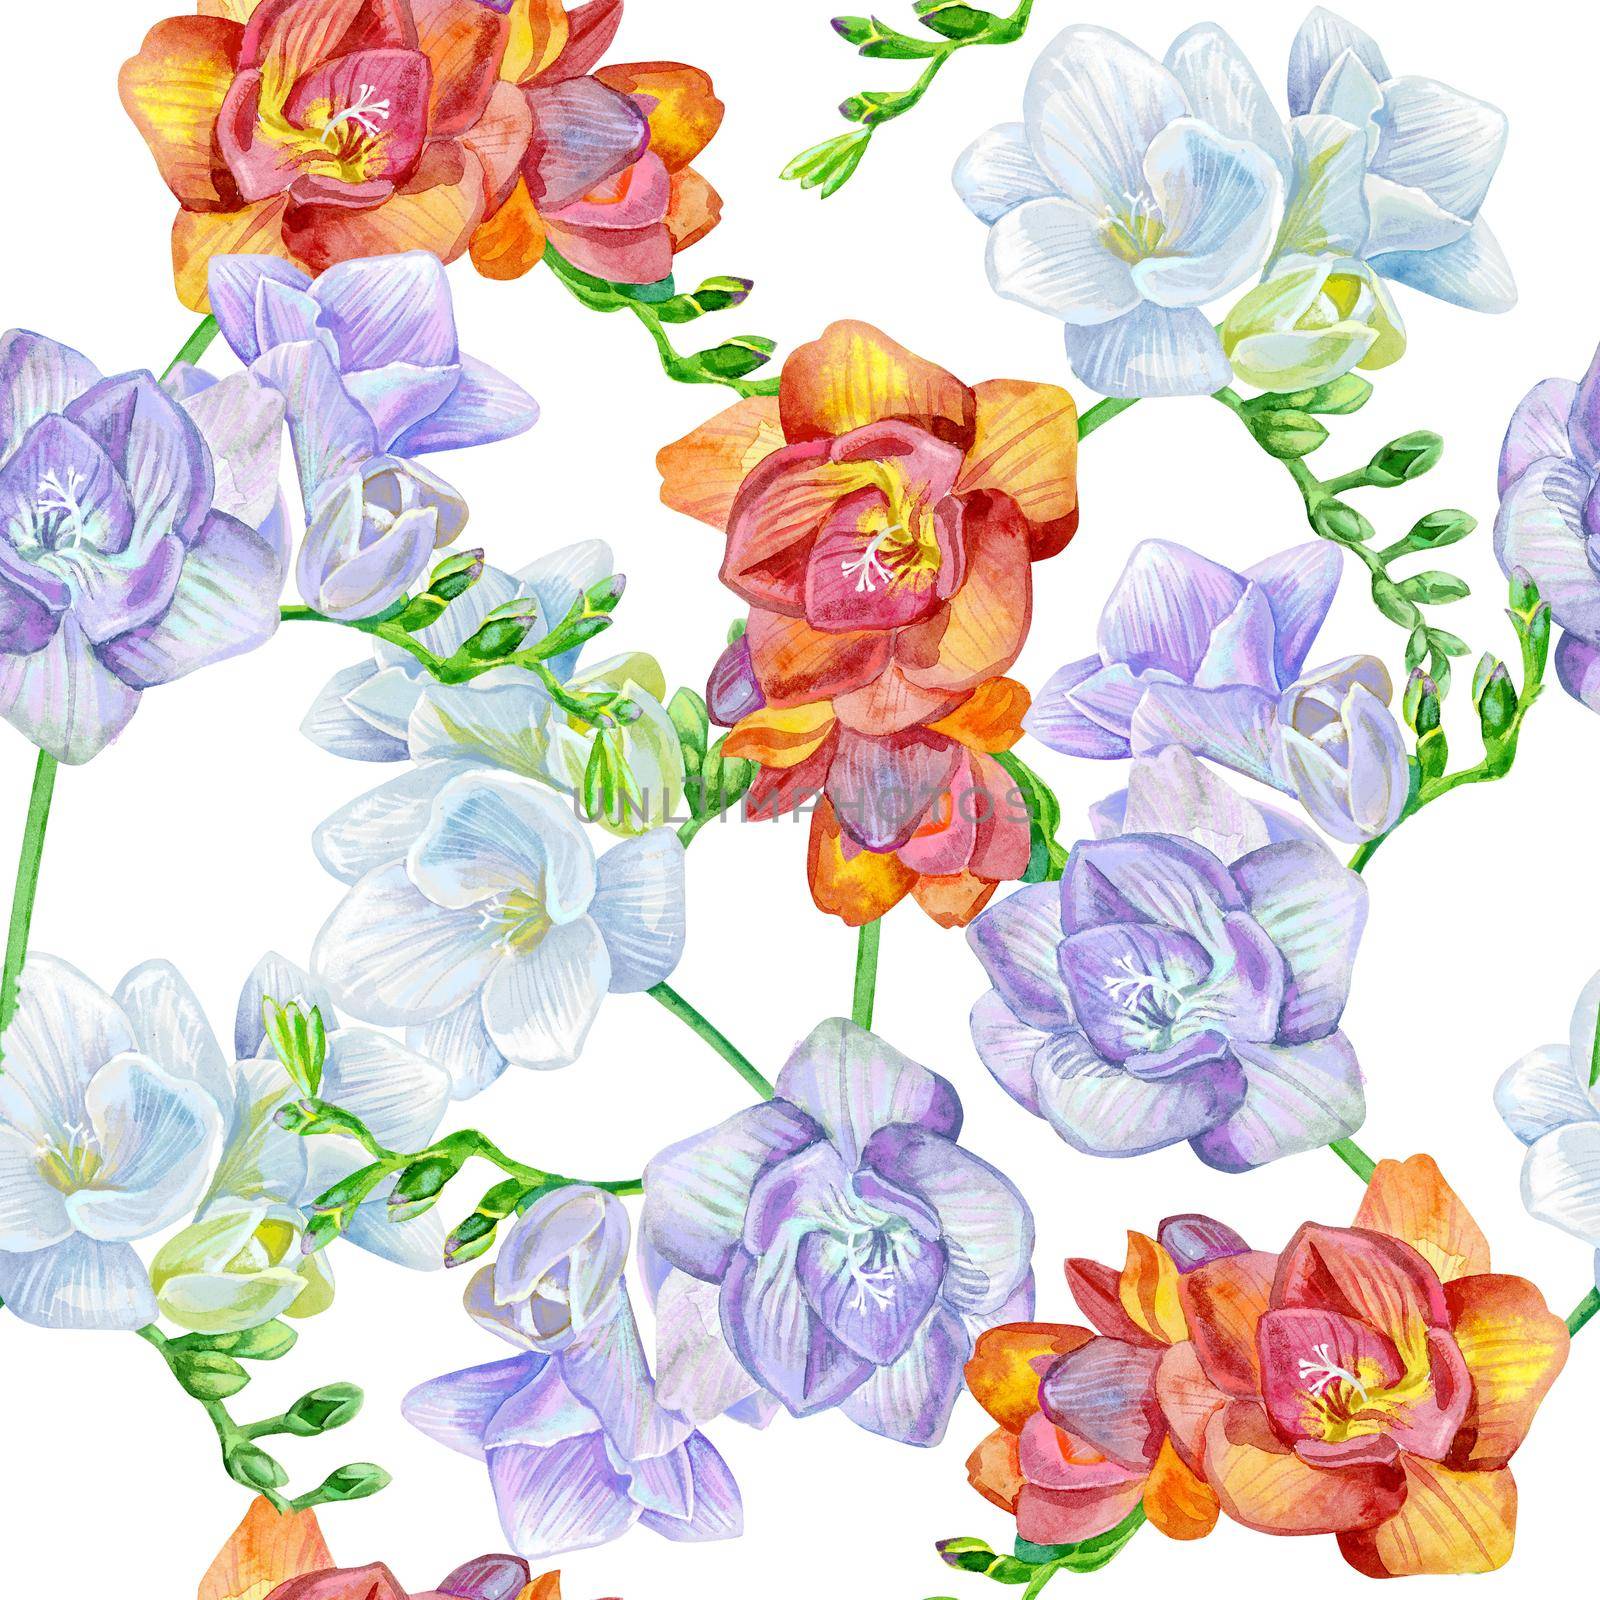 Floral seamless pattern with freesia on a white background. Artistic design for floral print for packaging, textile, wallpaper, gift wrap, greeting or wedding background.